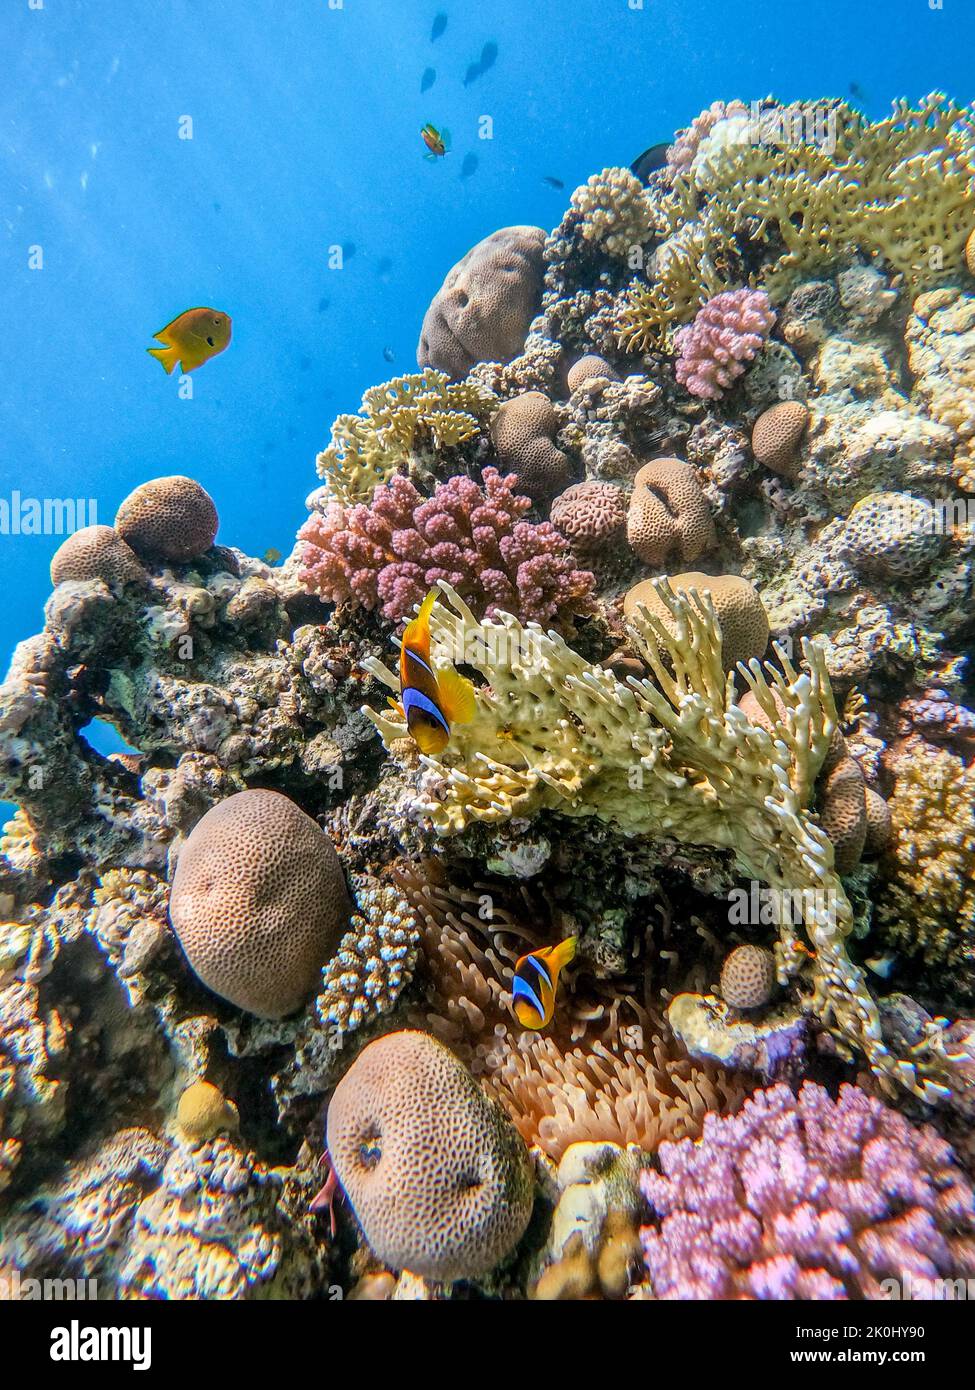 Close up view of Colorful tropical fish Red sea clown fish or amphiprion bicinctus (Amphiprion Inae) hiding in anemone its natural shelter on a coral Stock Photo